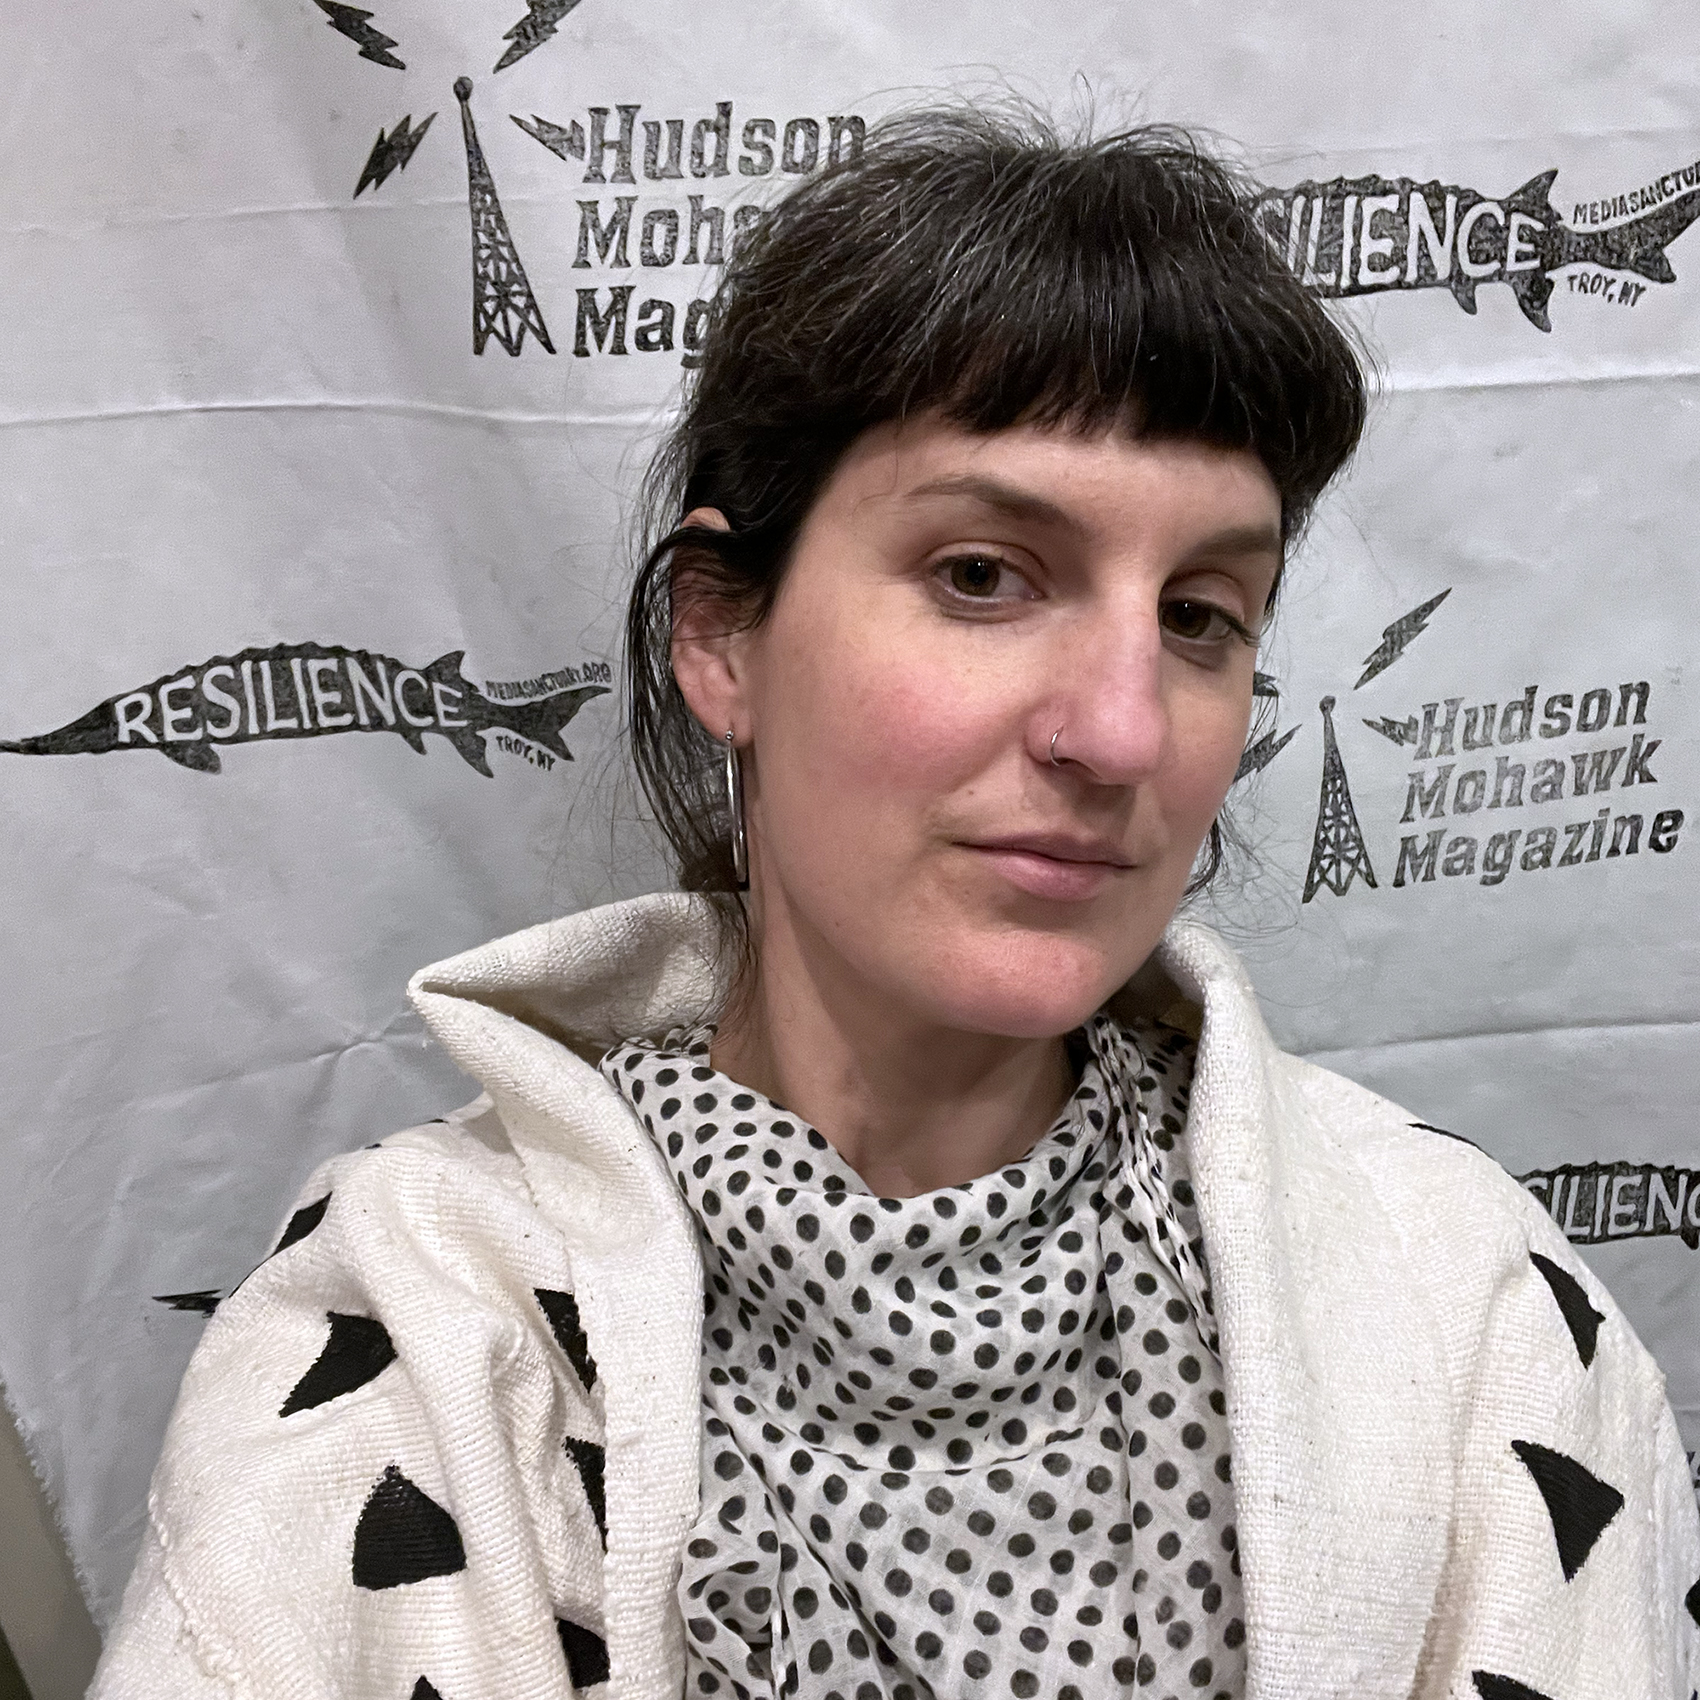 a portrait of Sina Basila Hickey in front of a black and white backdrop with the HMM and Sanctuary logo. Sina is a white woman with dark hair and bangs, a nose ring, hoop earrings, and is wearing black and white graphic patterned clothing.